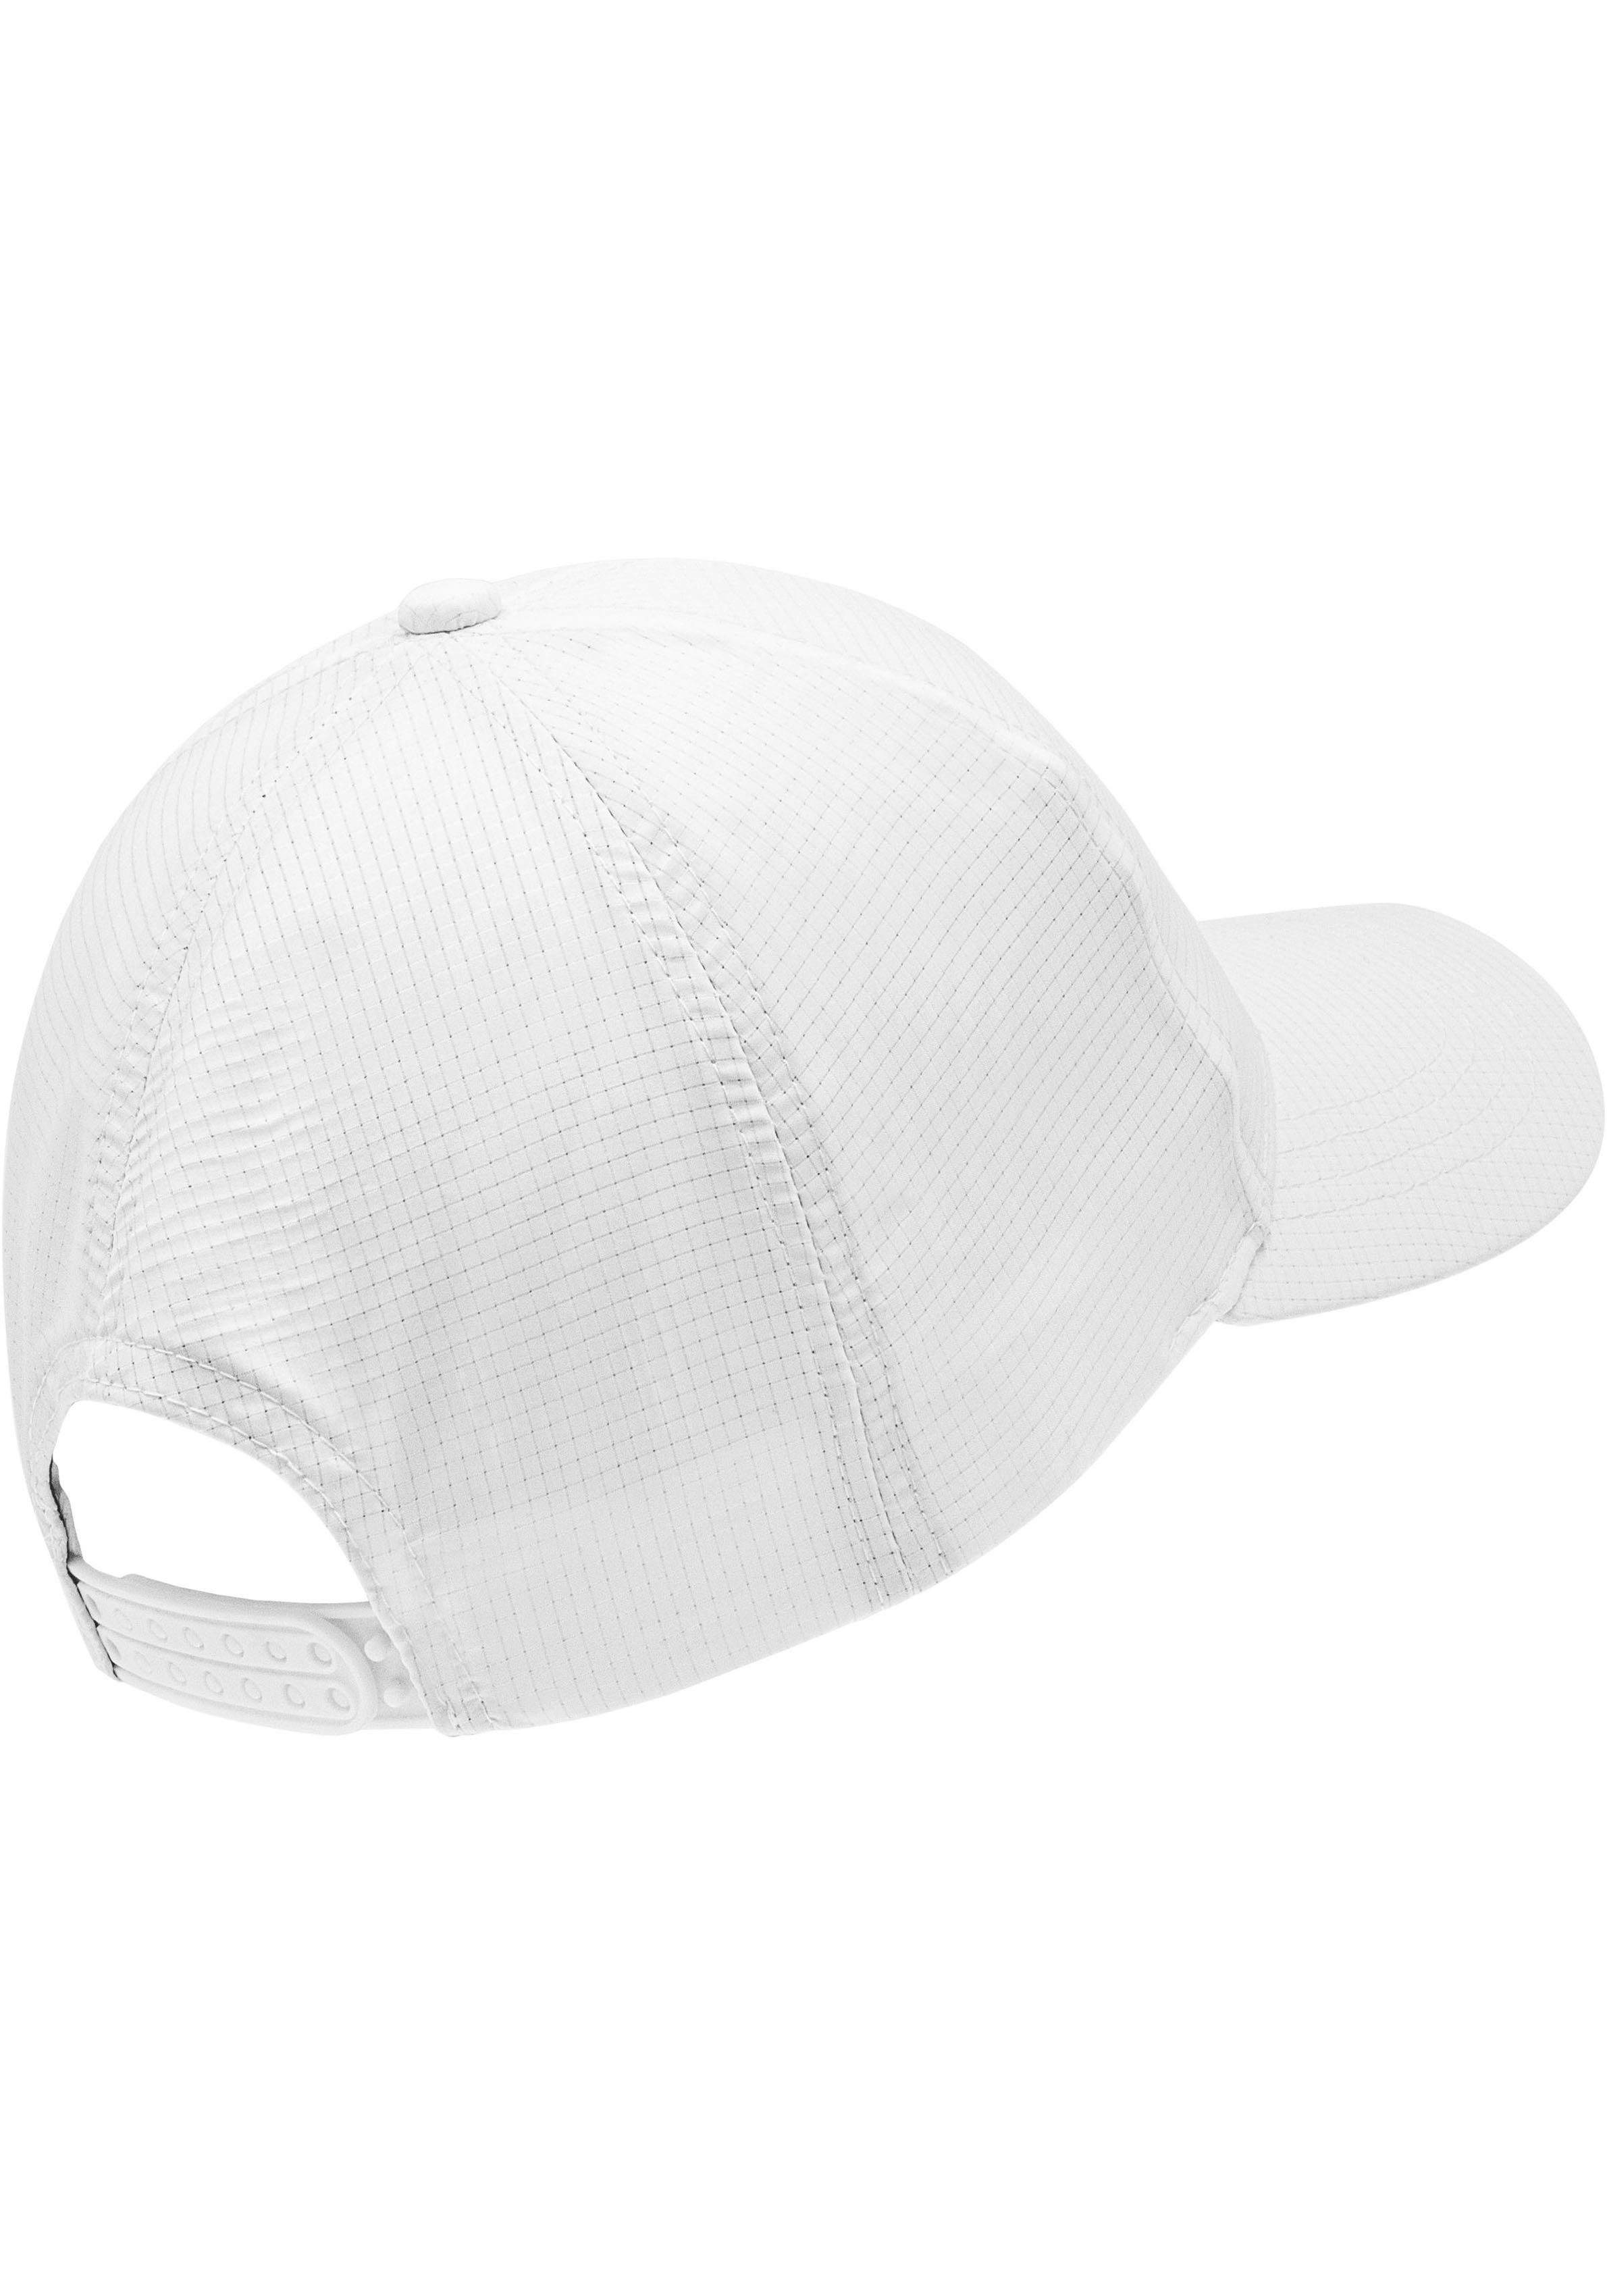 Cap Baseball Hat Langley weiß chillouts